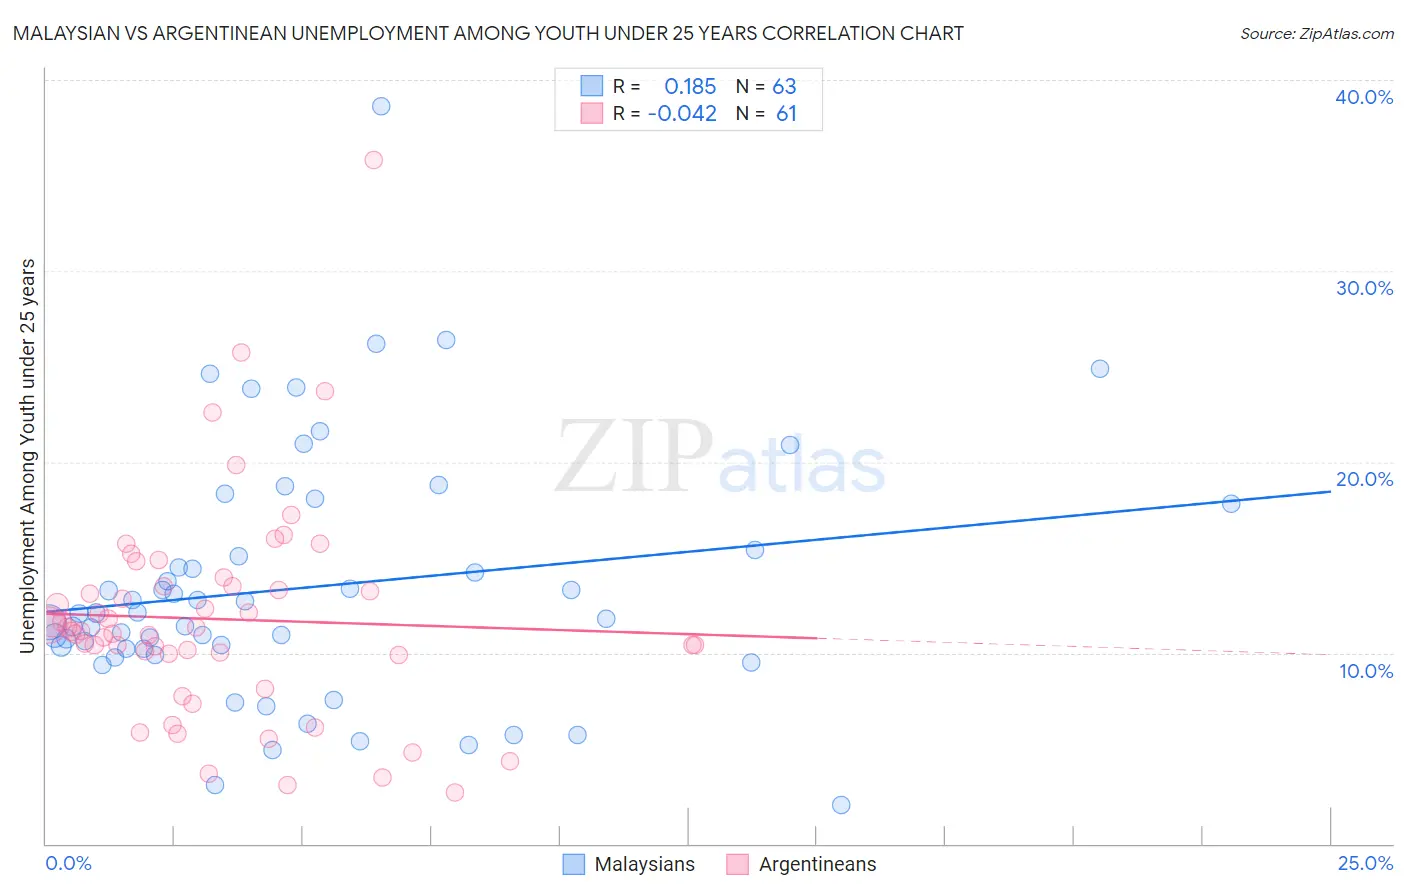 Malaysian vs Argentinean Unemployment Among Youth under 25 years